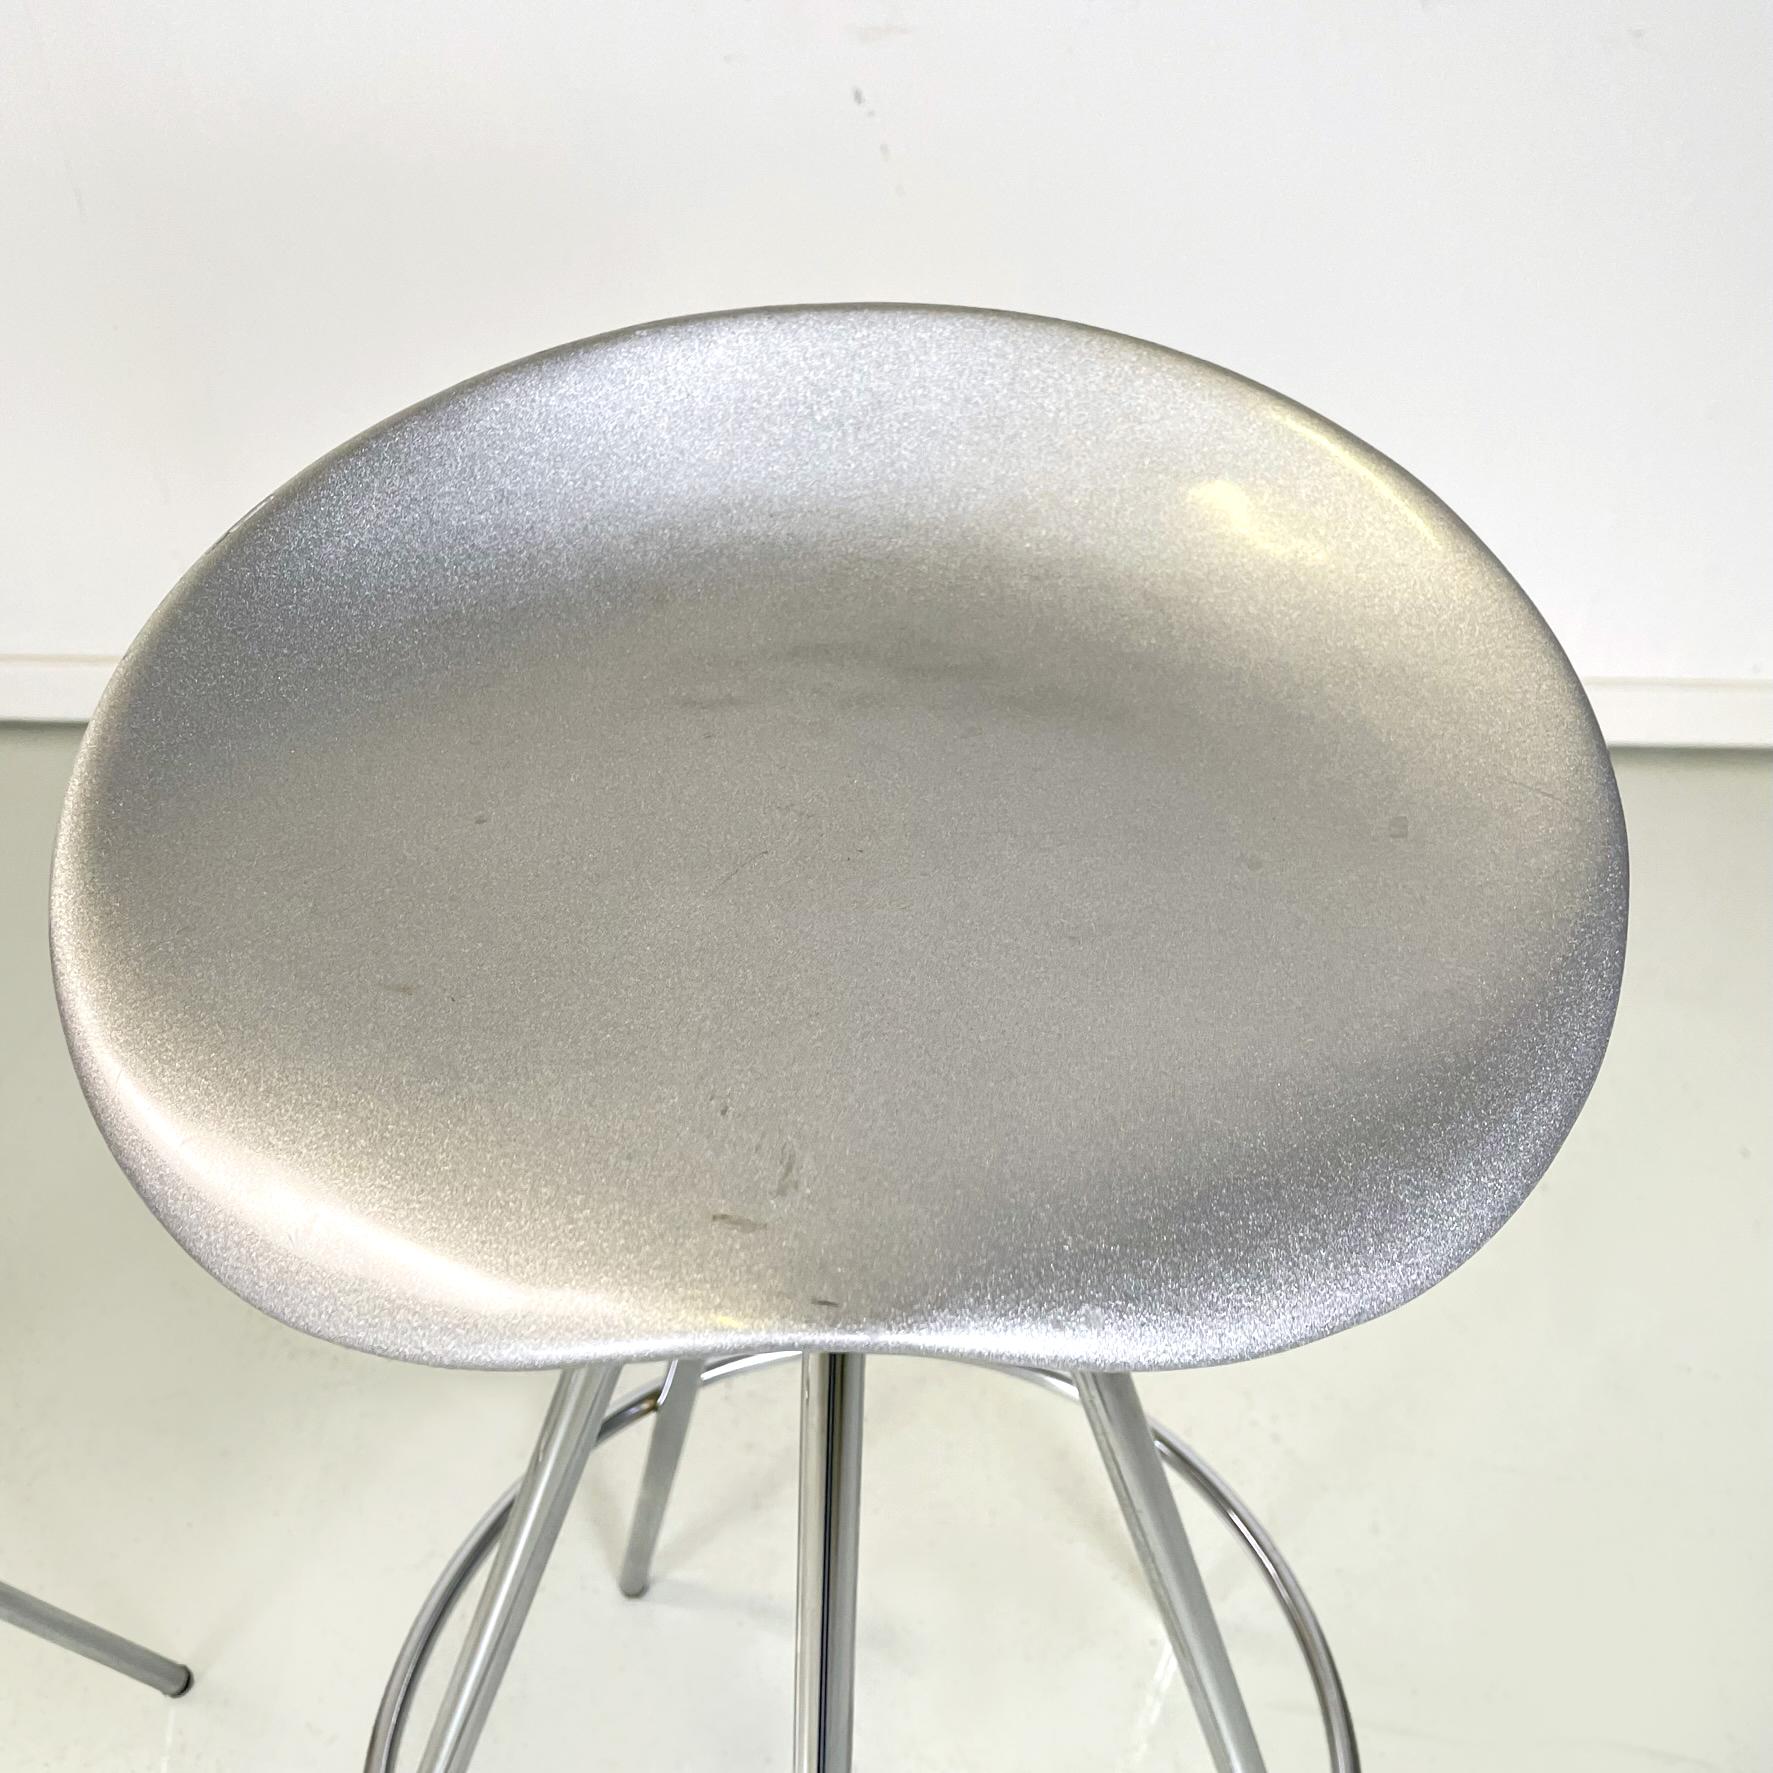 Metal Spanish Post-Modern Bar Stools Jamaica by Pepe Cortés for Bd Barcellona, 2000s For Sale